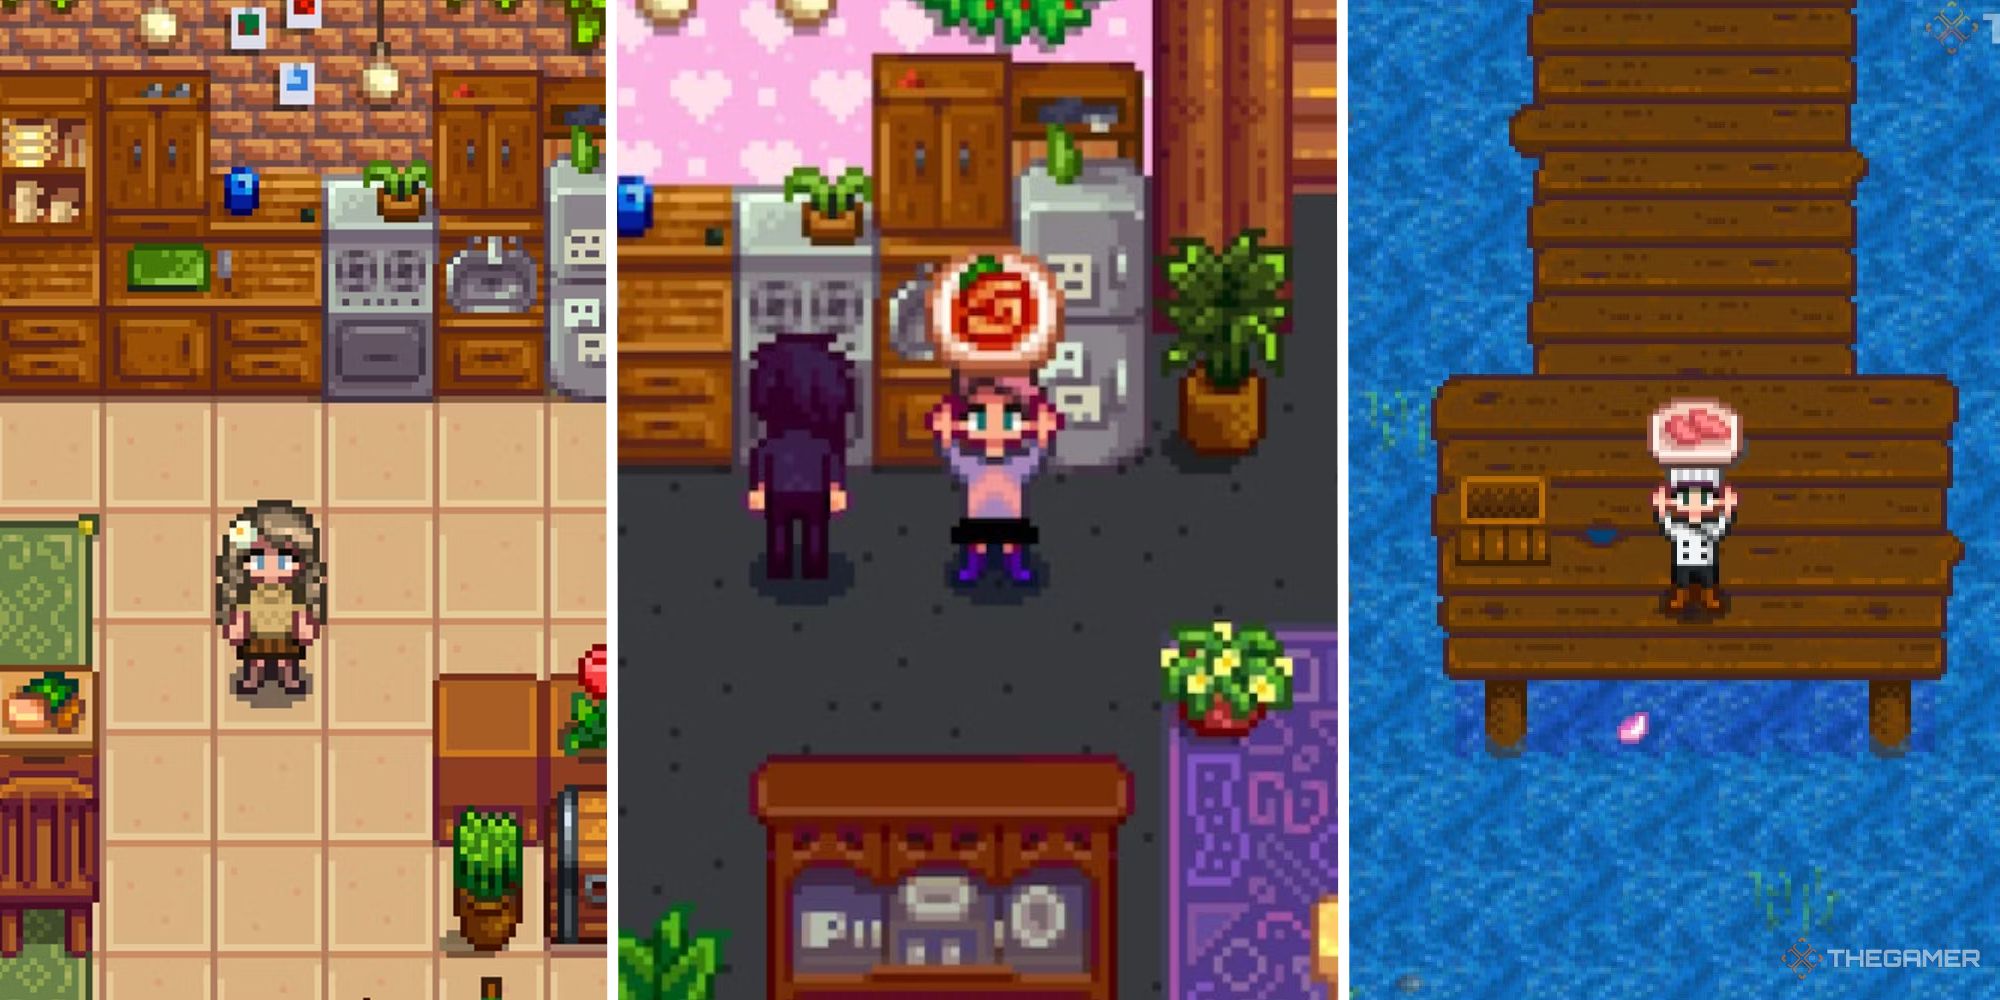 stardew valley split image showing player in kitchen, next to two images of people holding dish